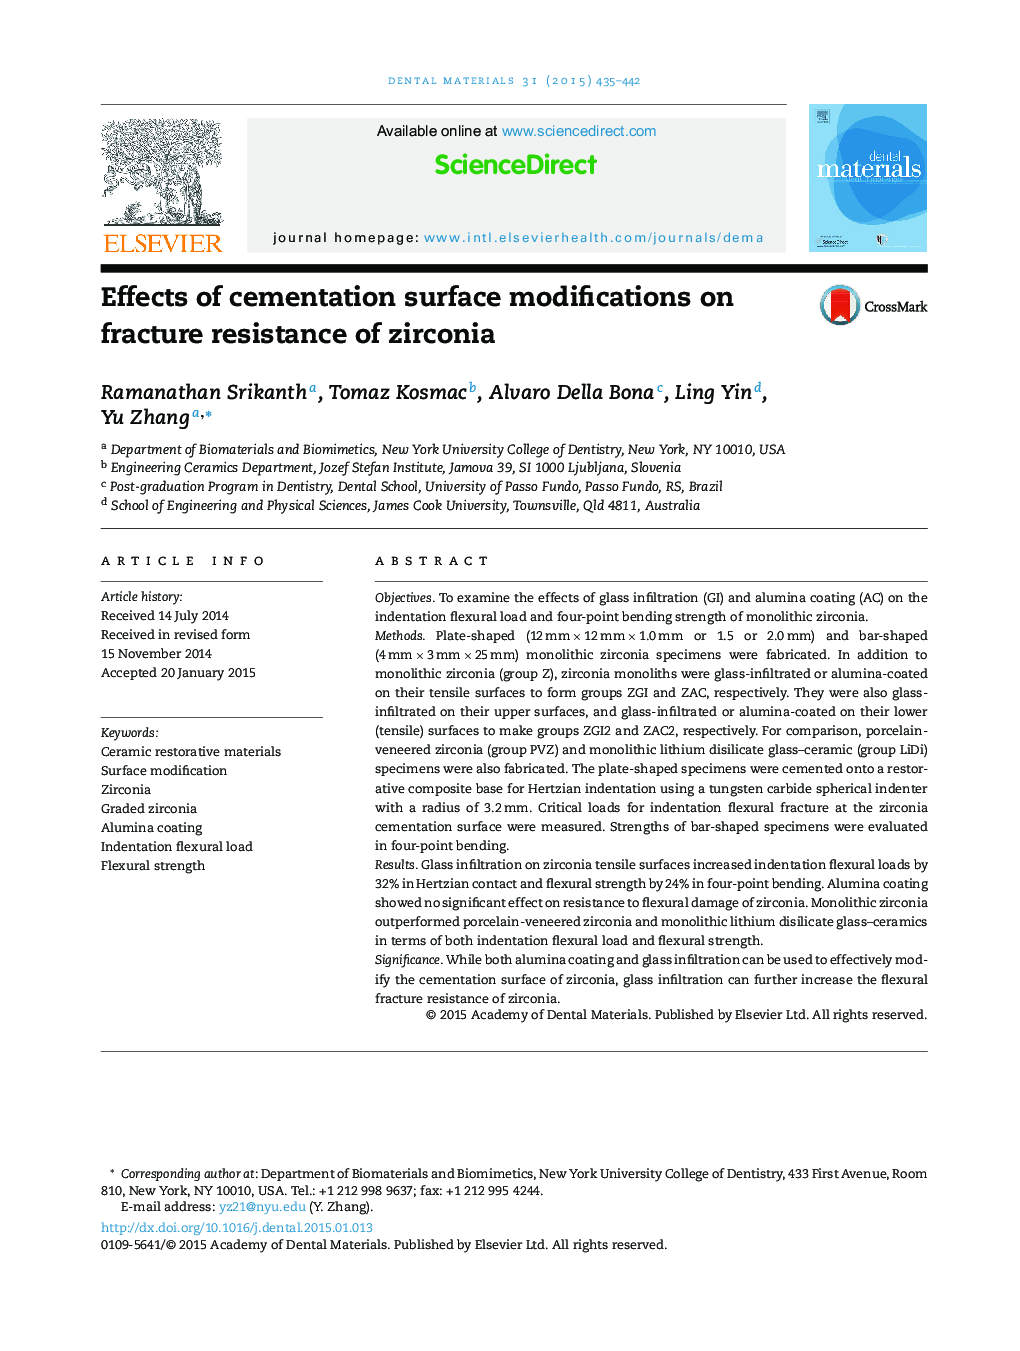 Effects of cementation surface modifications on fracture resistance of zirconia